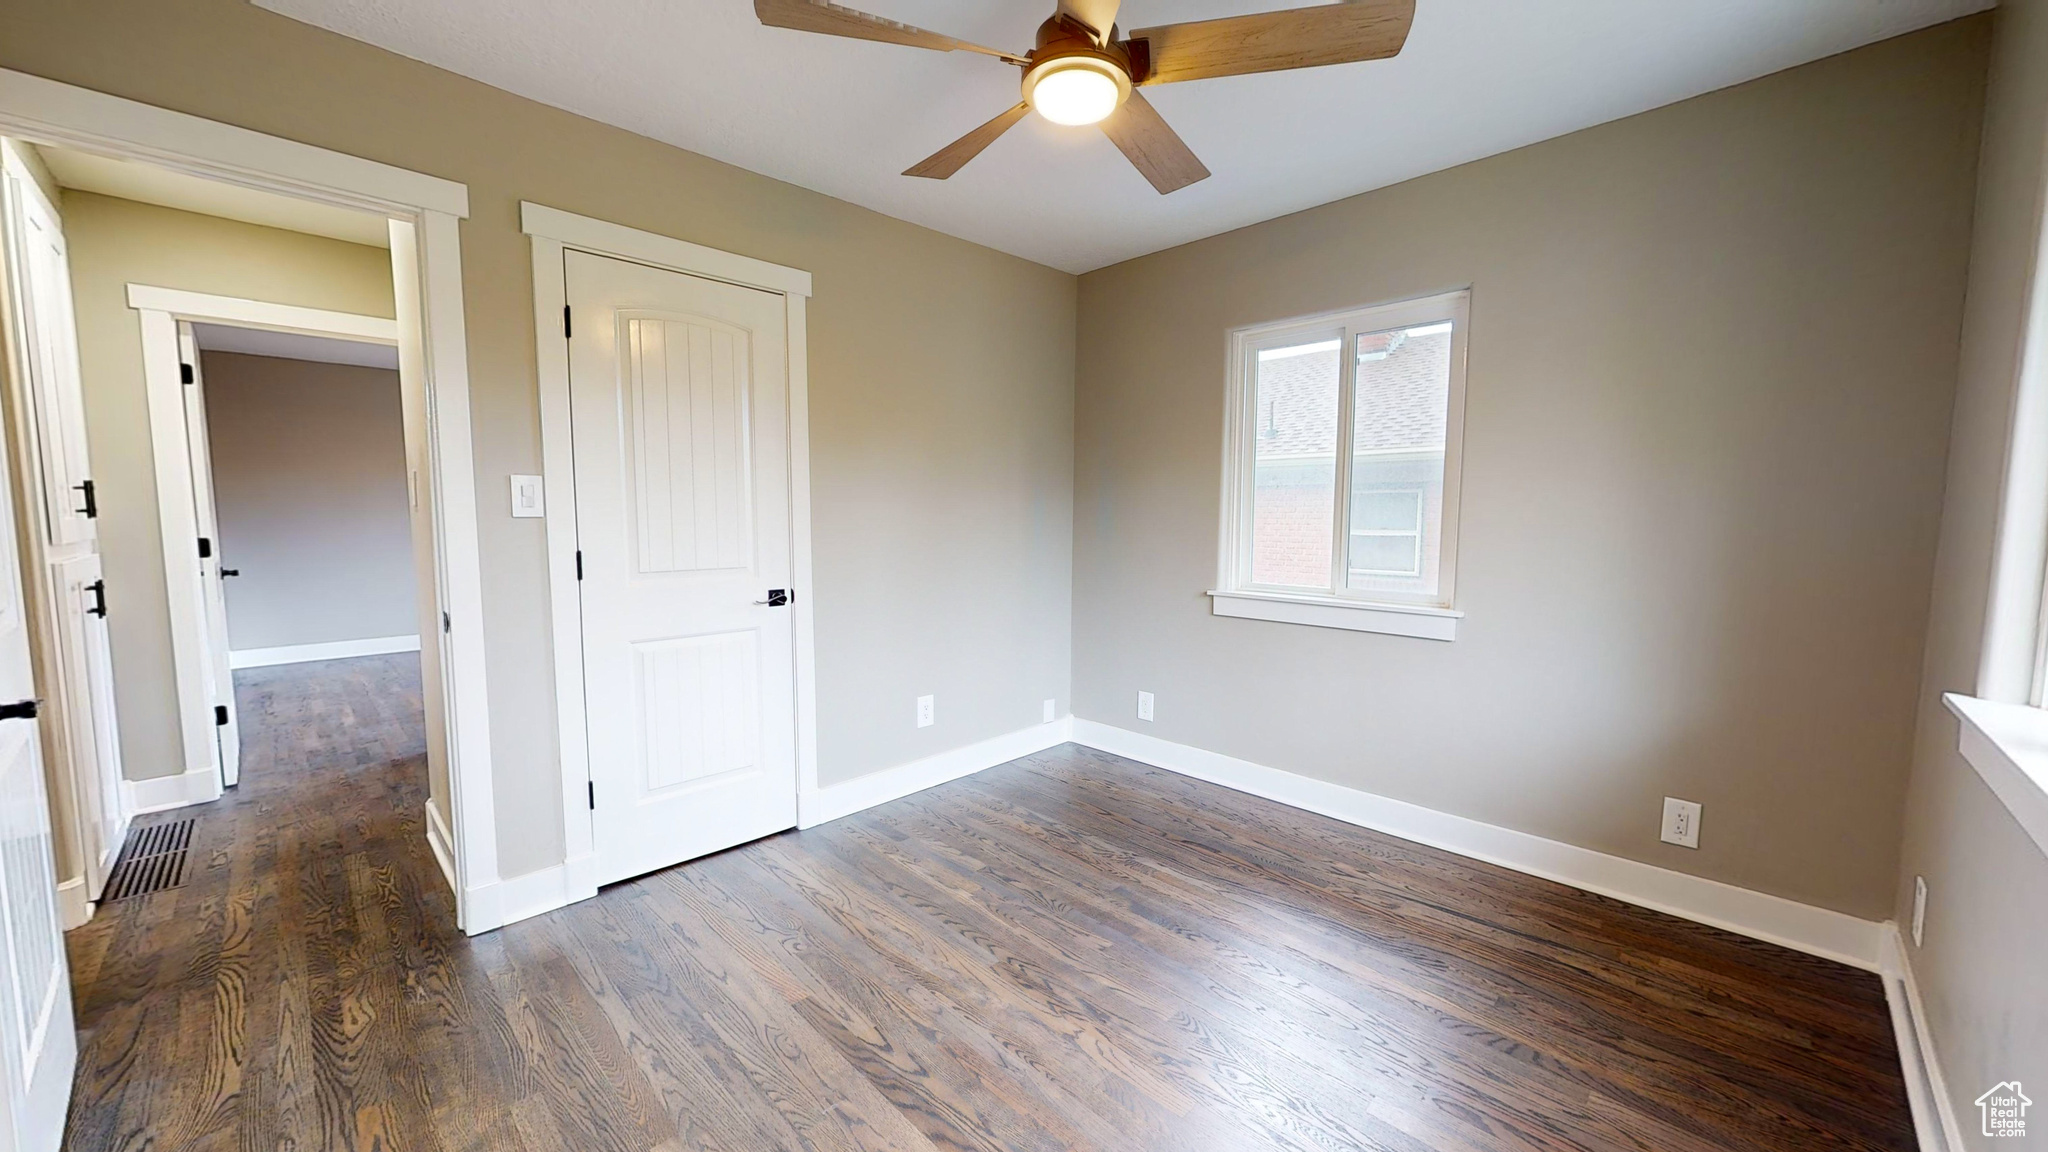 Spare room with ceiling fan and dark wood-type flooring